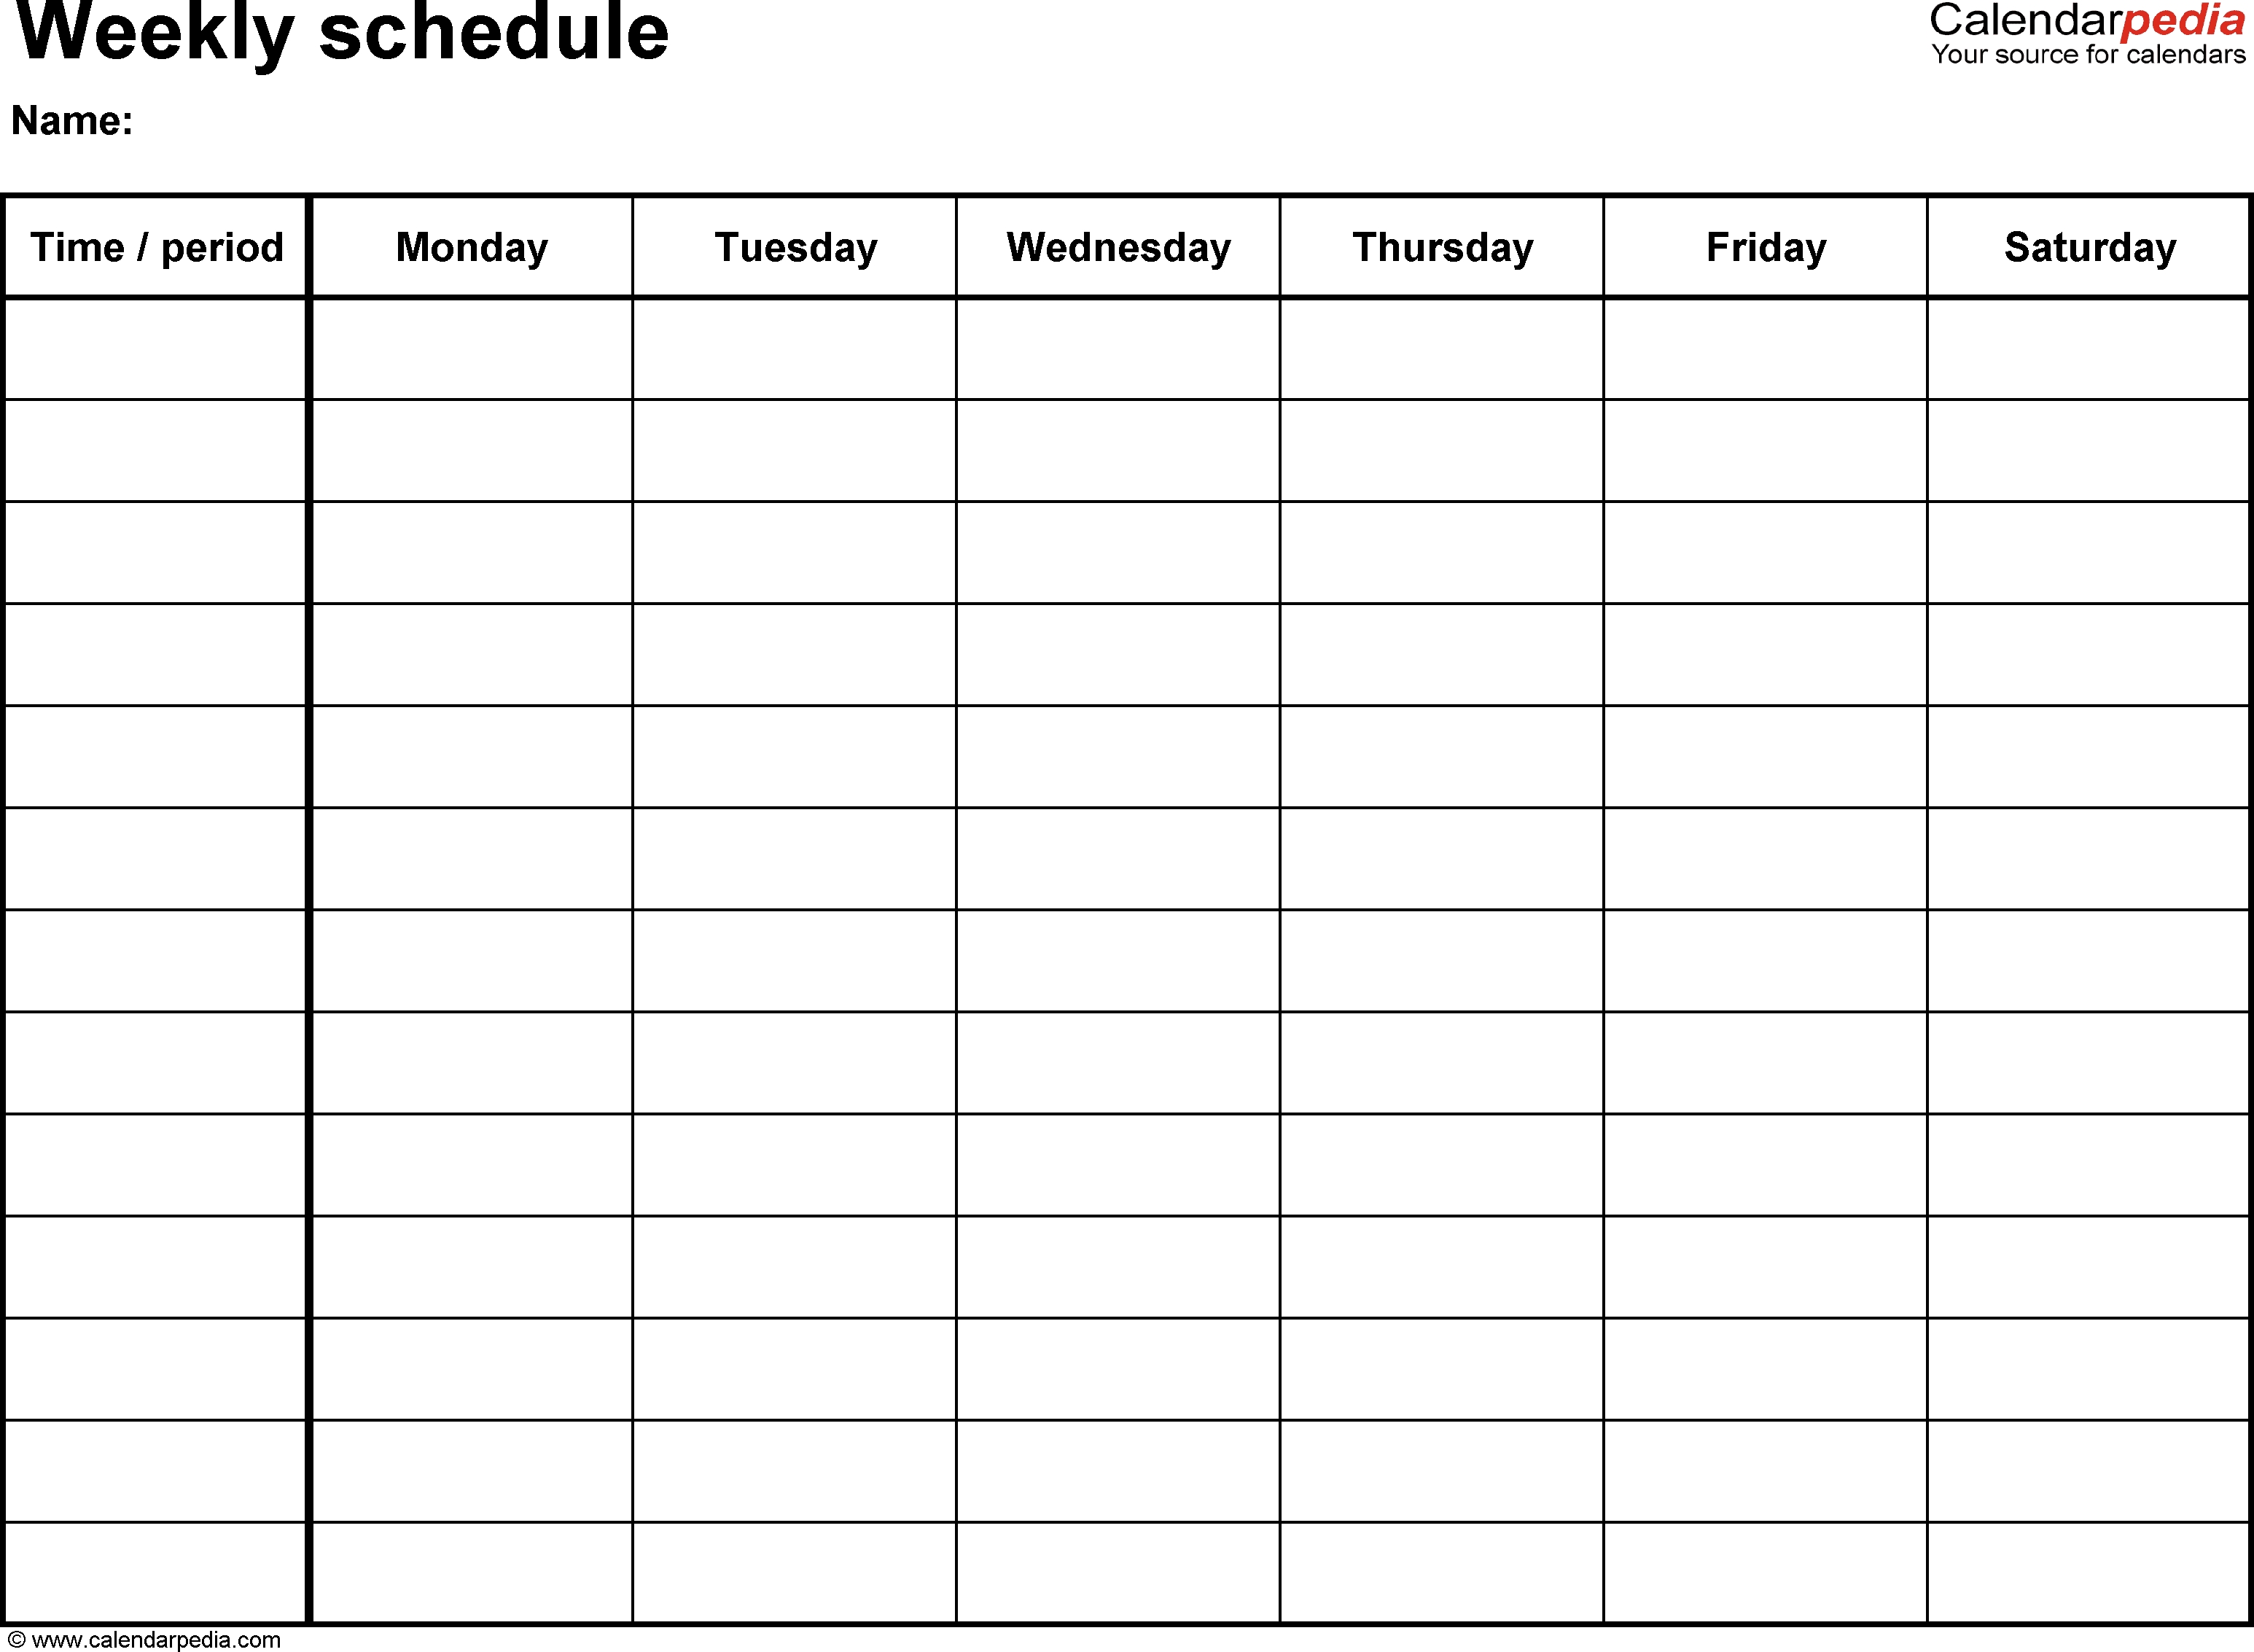 Free Weekly Schedule Templates For Word - 18 Templates intended for Blank Weekly Monday Through Friday Calendar Template